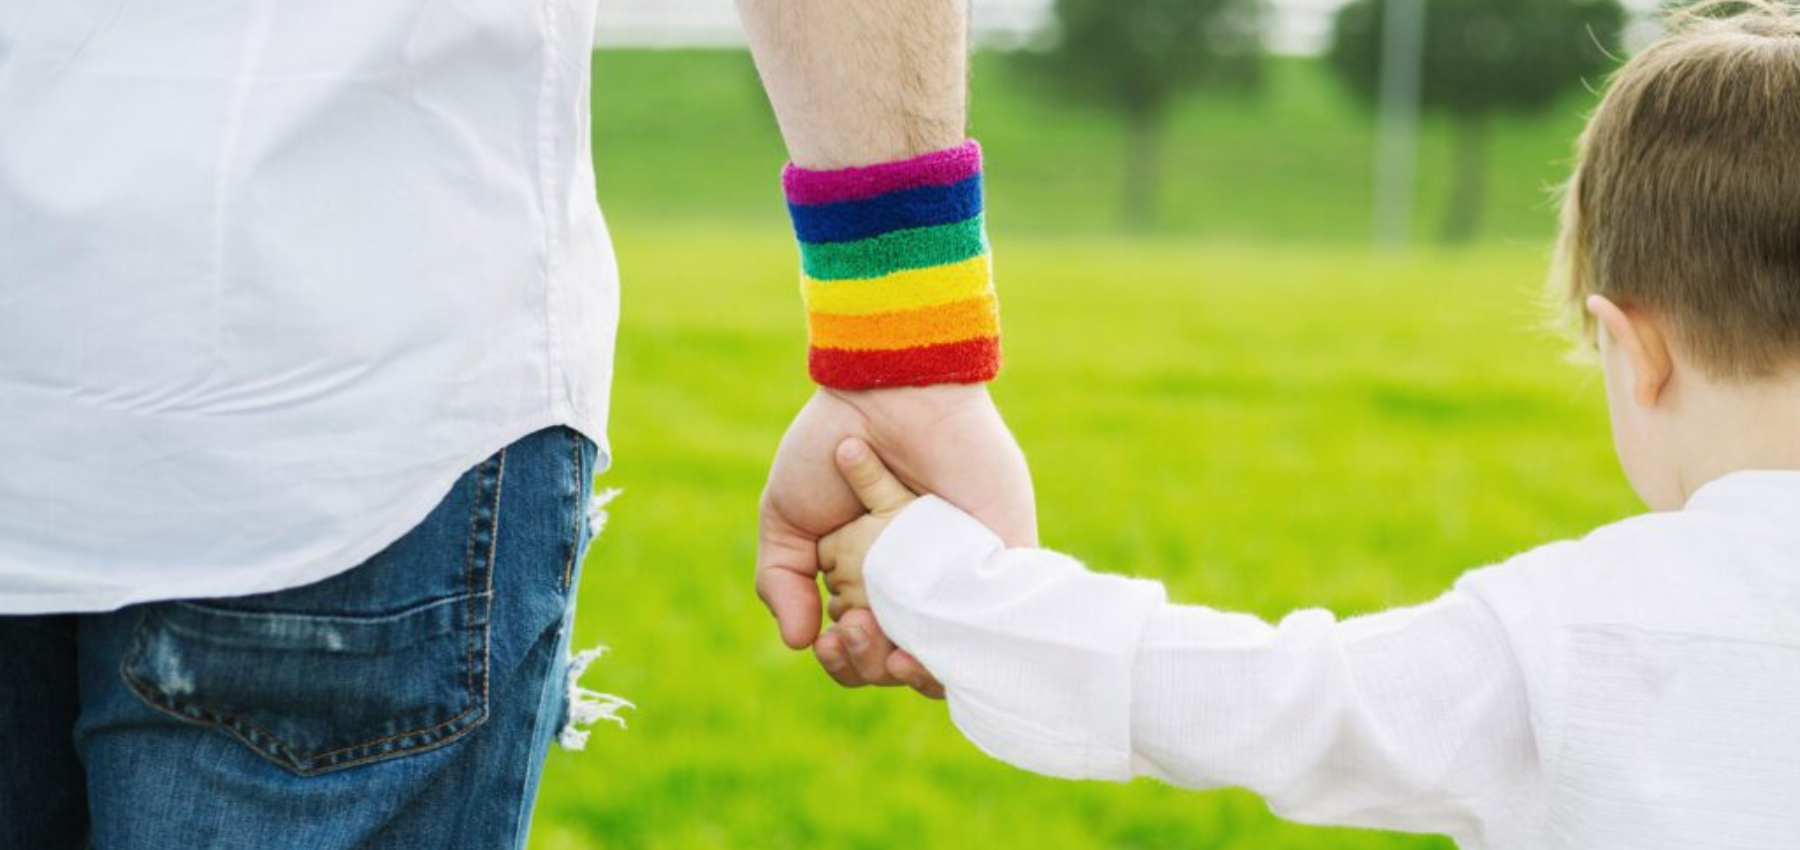 Adult with rainbow wrist band walks hand in hand with child